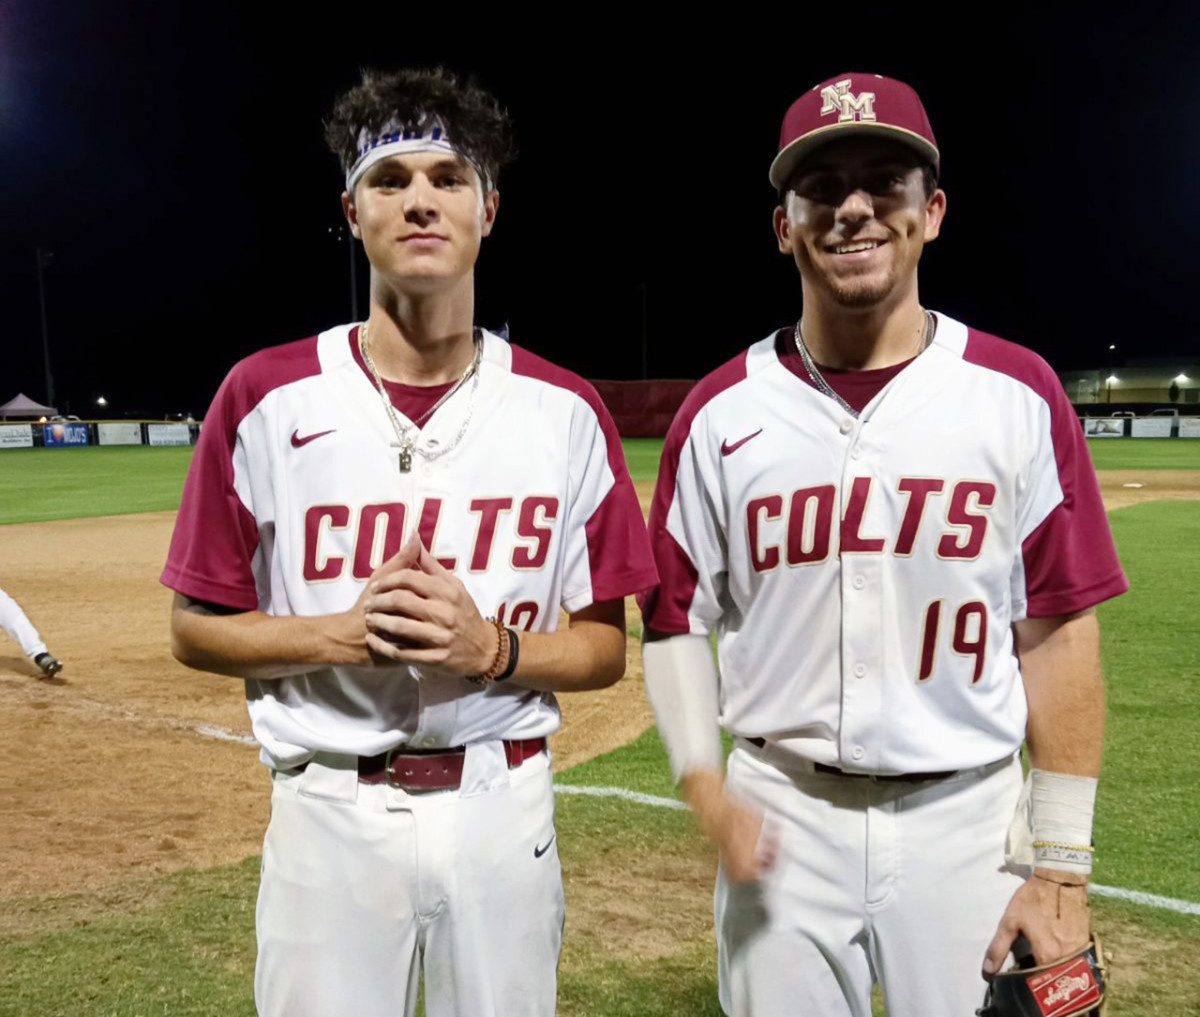 North Marion first baseman Jake Tompkins (left) hit a three-run homer and senior pitcher Hunter Jones got the win in a 7-2 victory against Hernando.